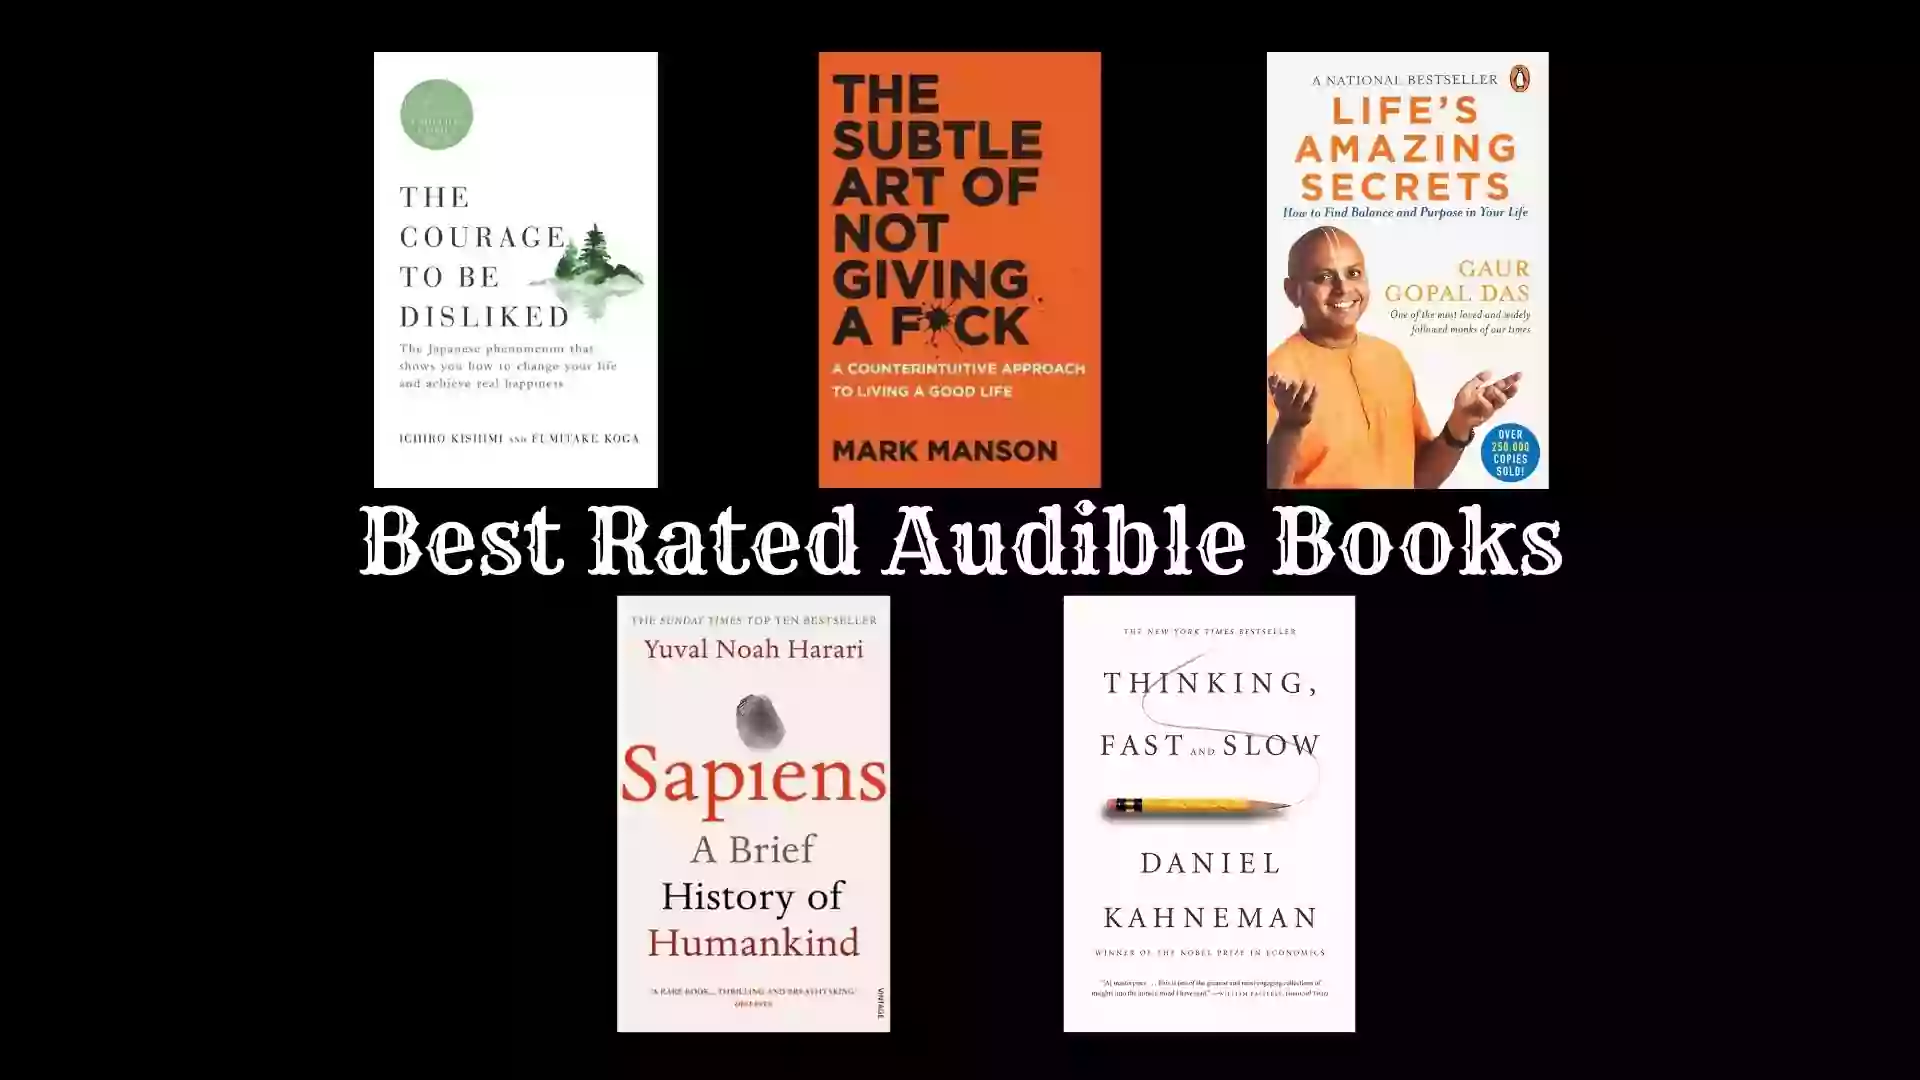 Best Rated Audible Books